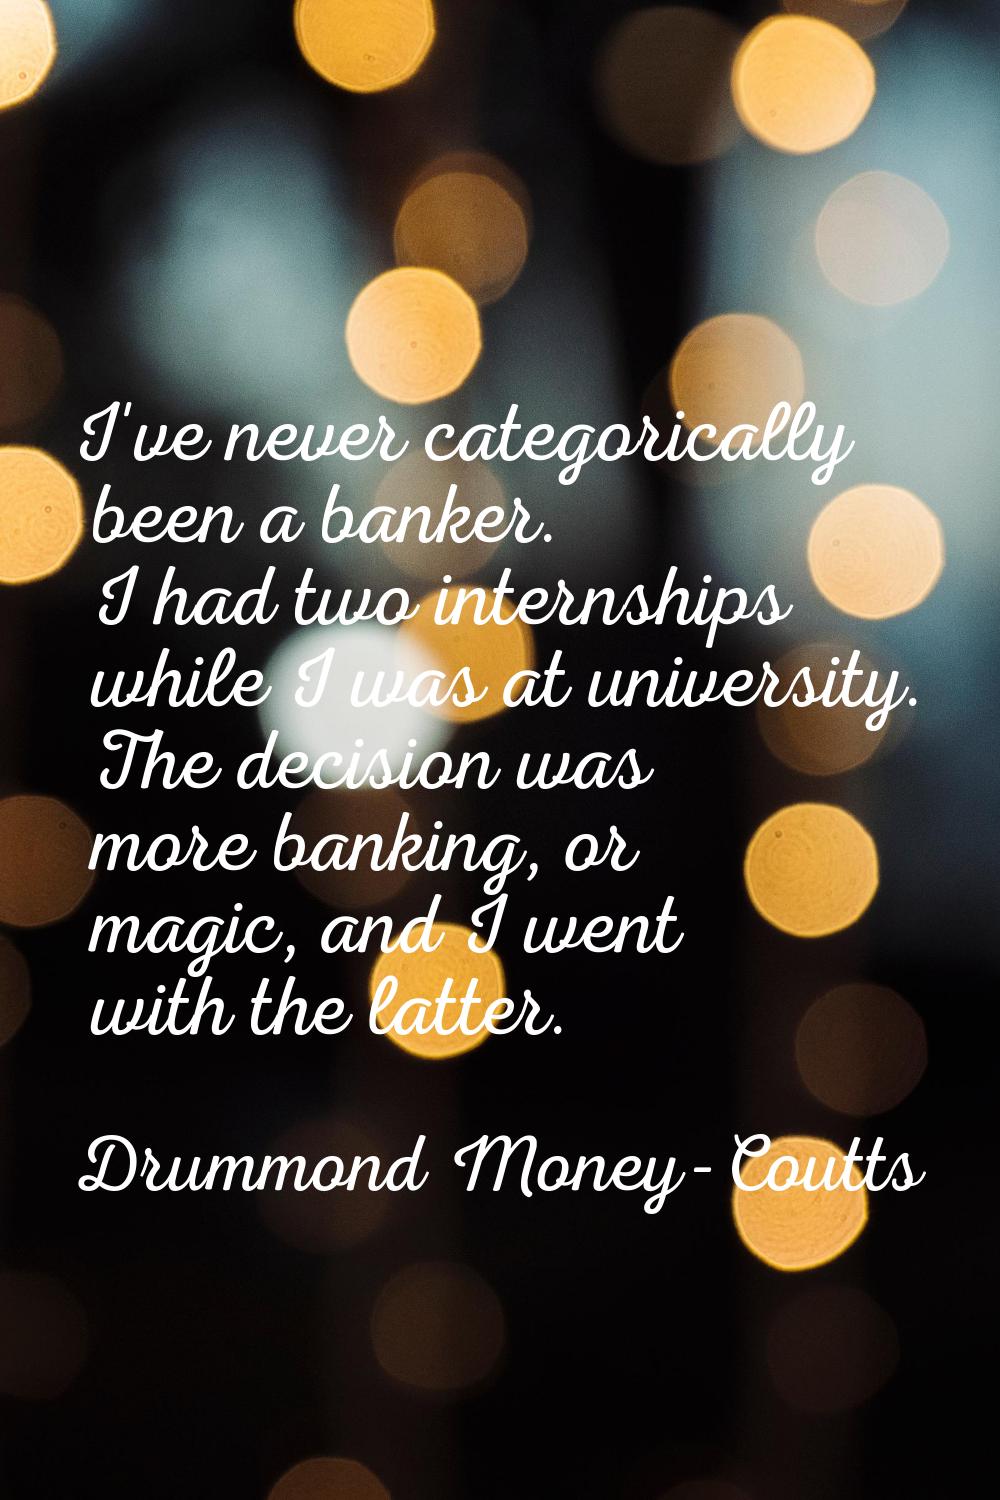 I've never categorically been a banker. I had two internships while I was at university. The decisi